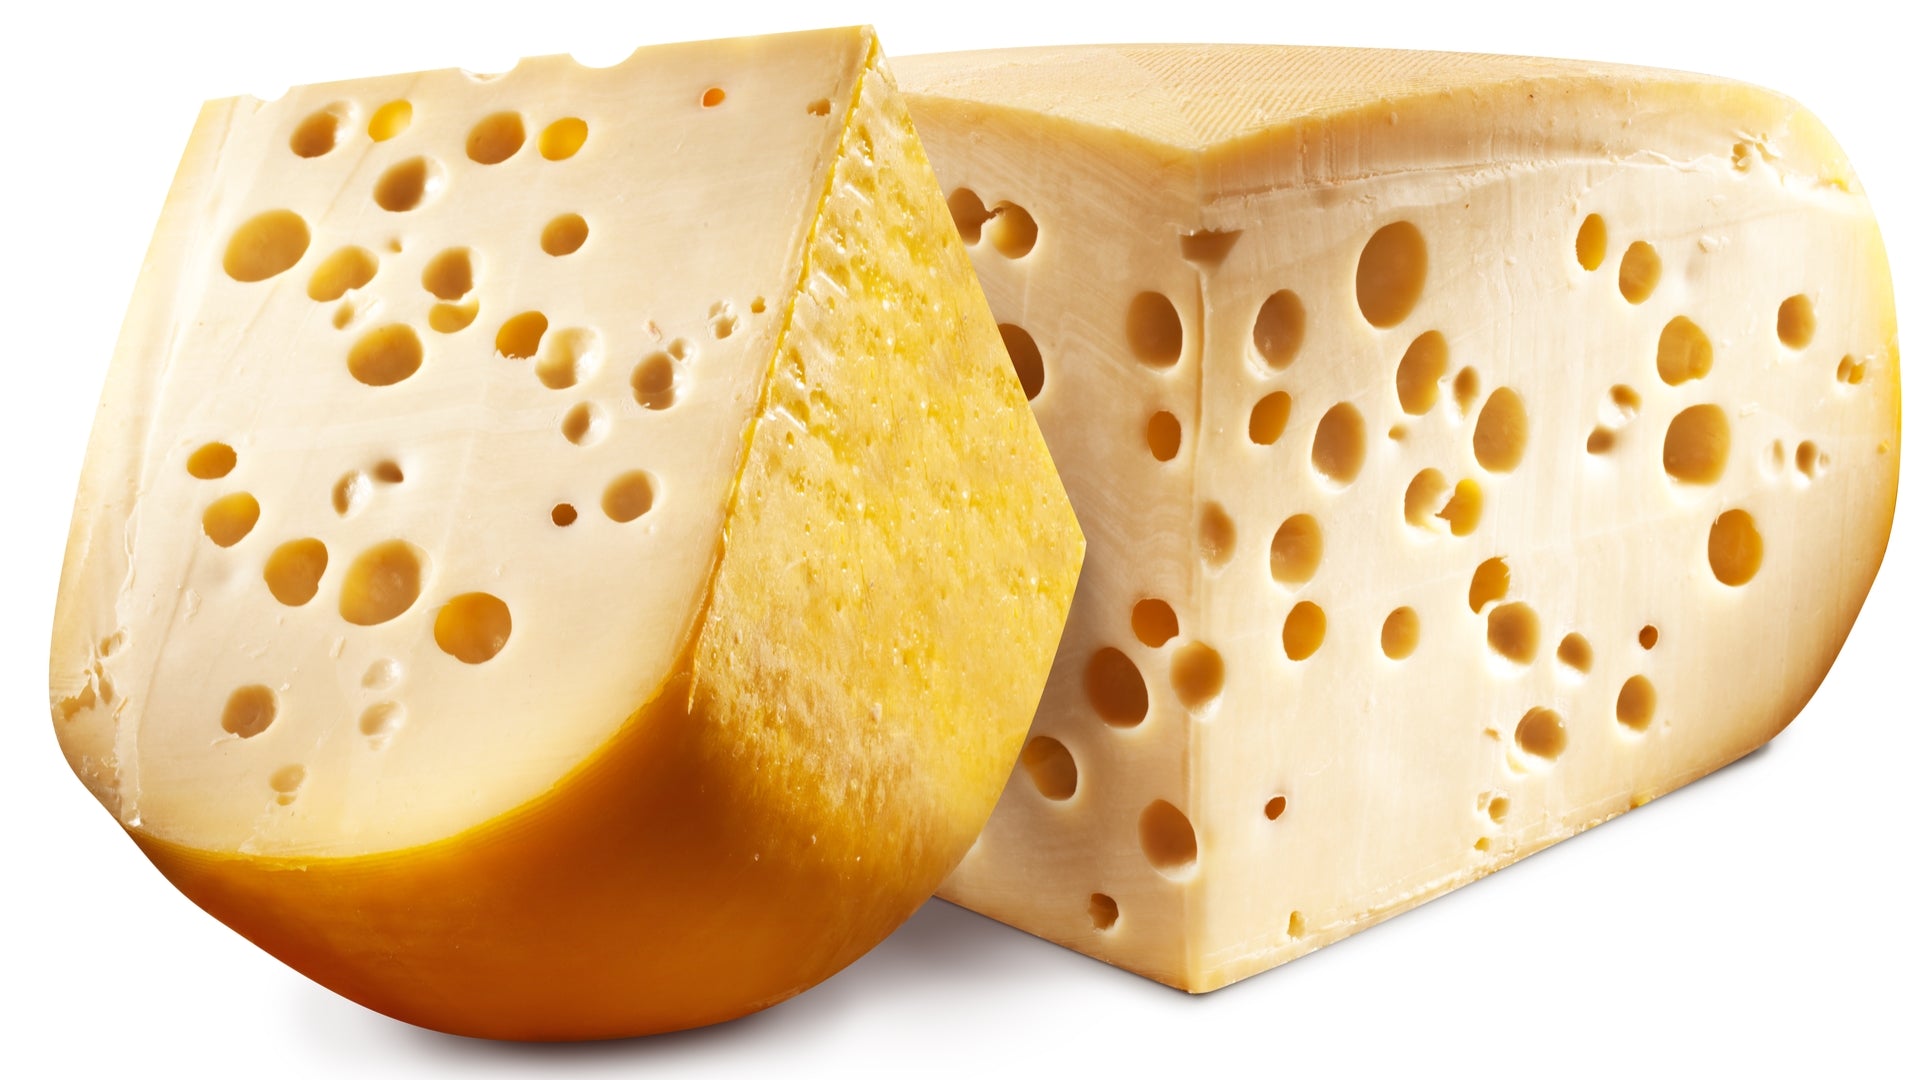 Cheese - Emmenthal 8 oz